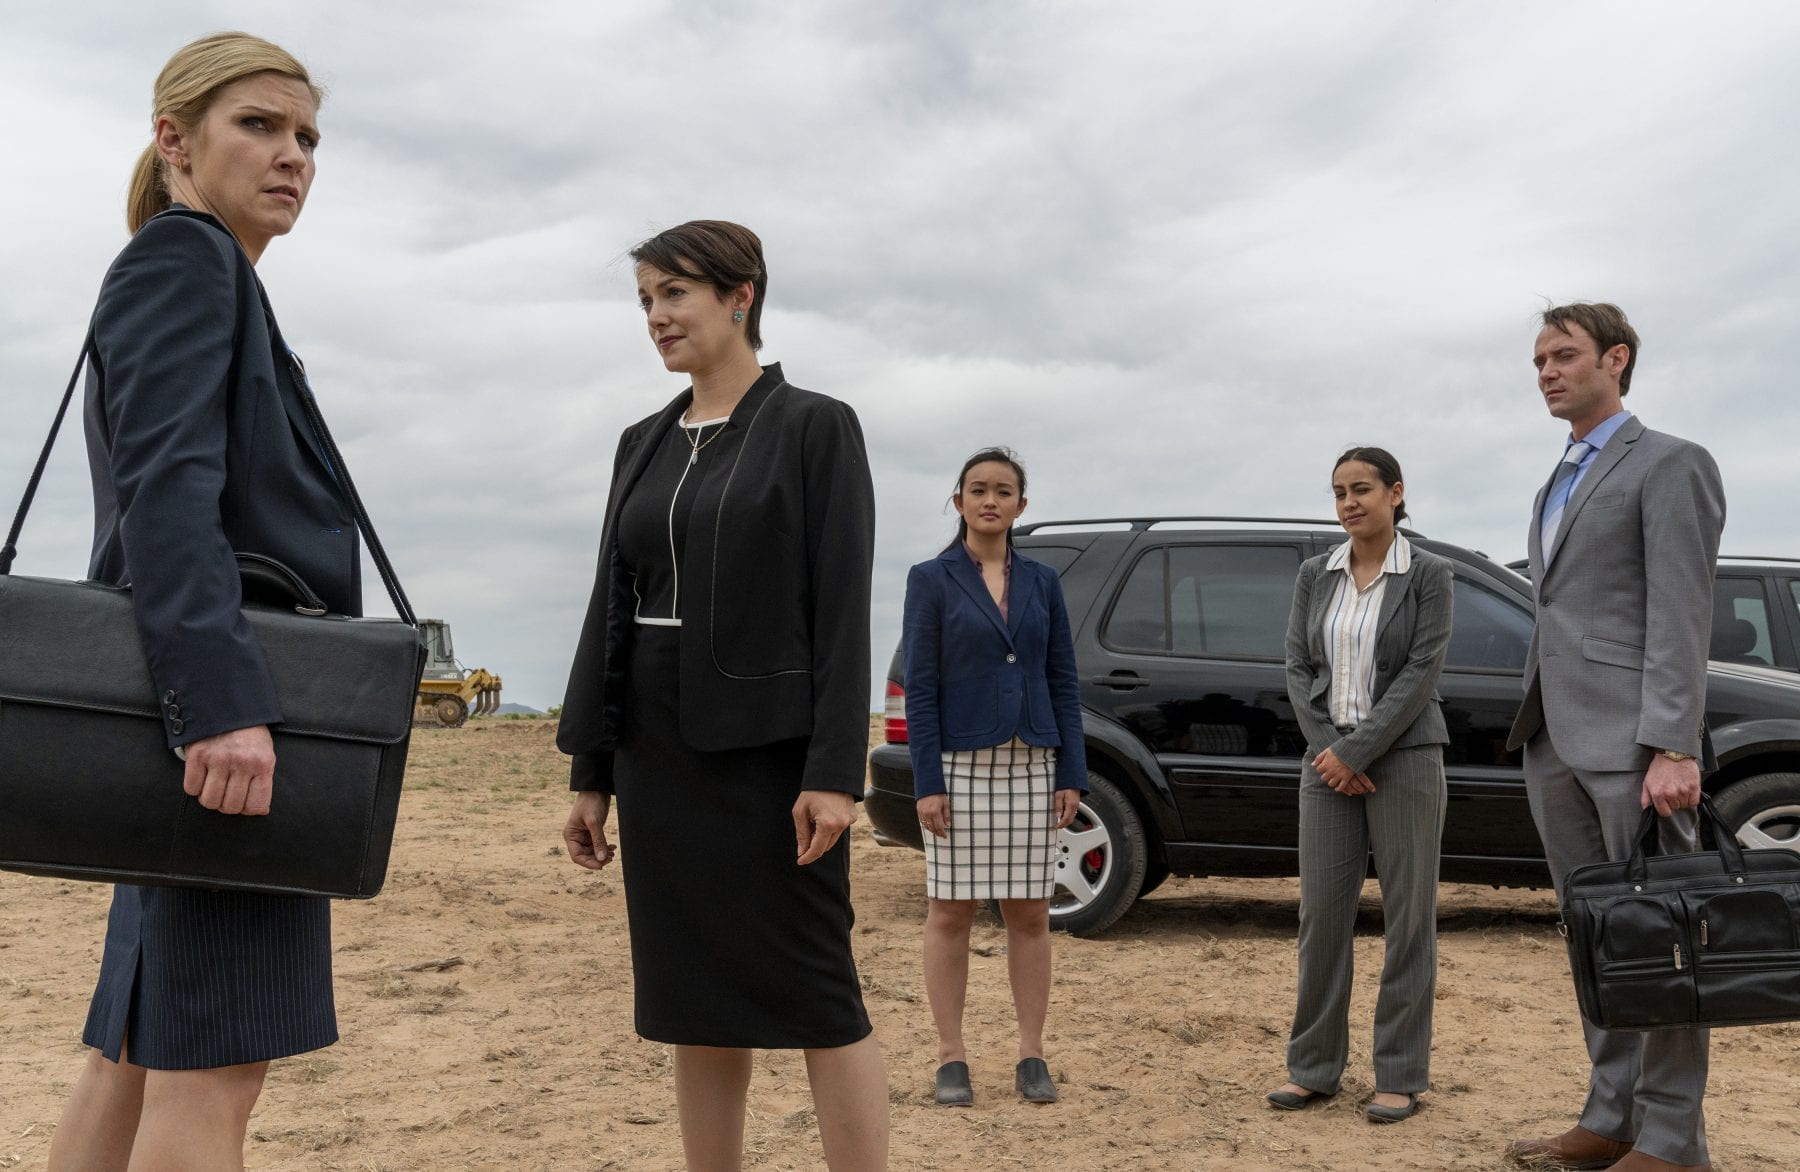 Kim, Paige, and three associates stand in front of a black SUV at the Tucumcari build site